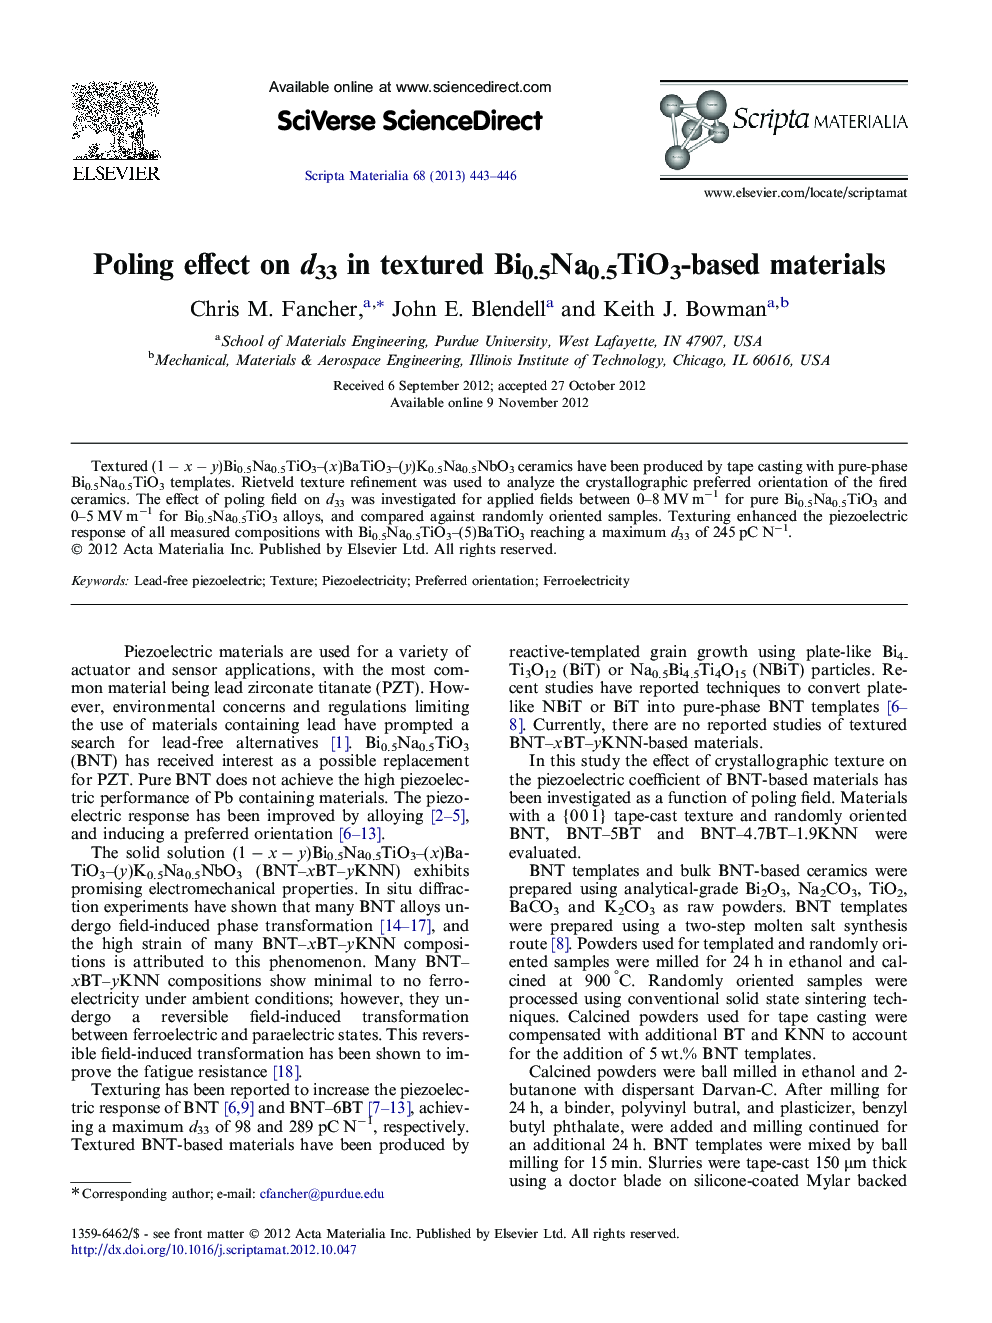 Poling effect on d33 in textured Bi0.5Na0.5TiO3-based materials